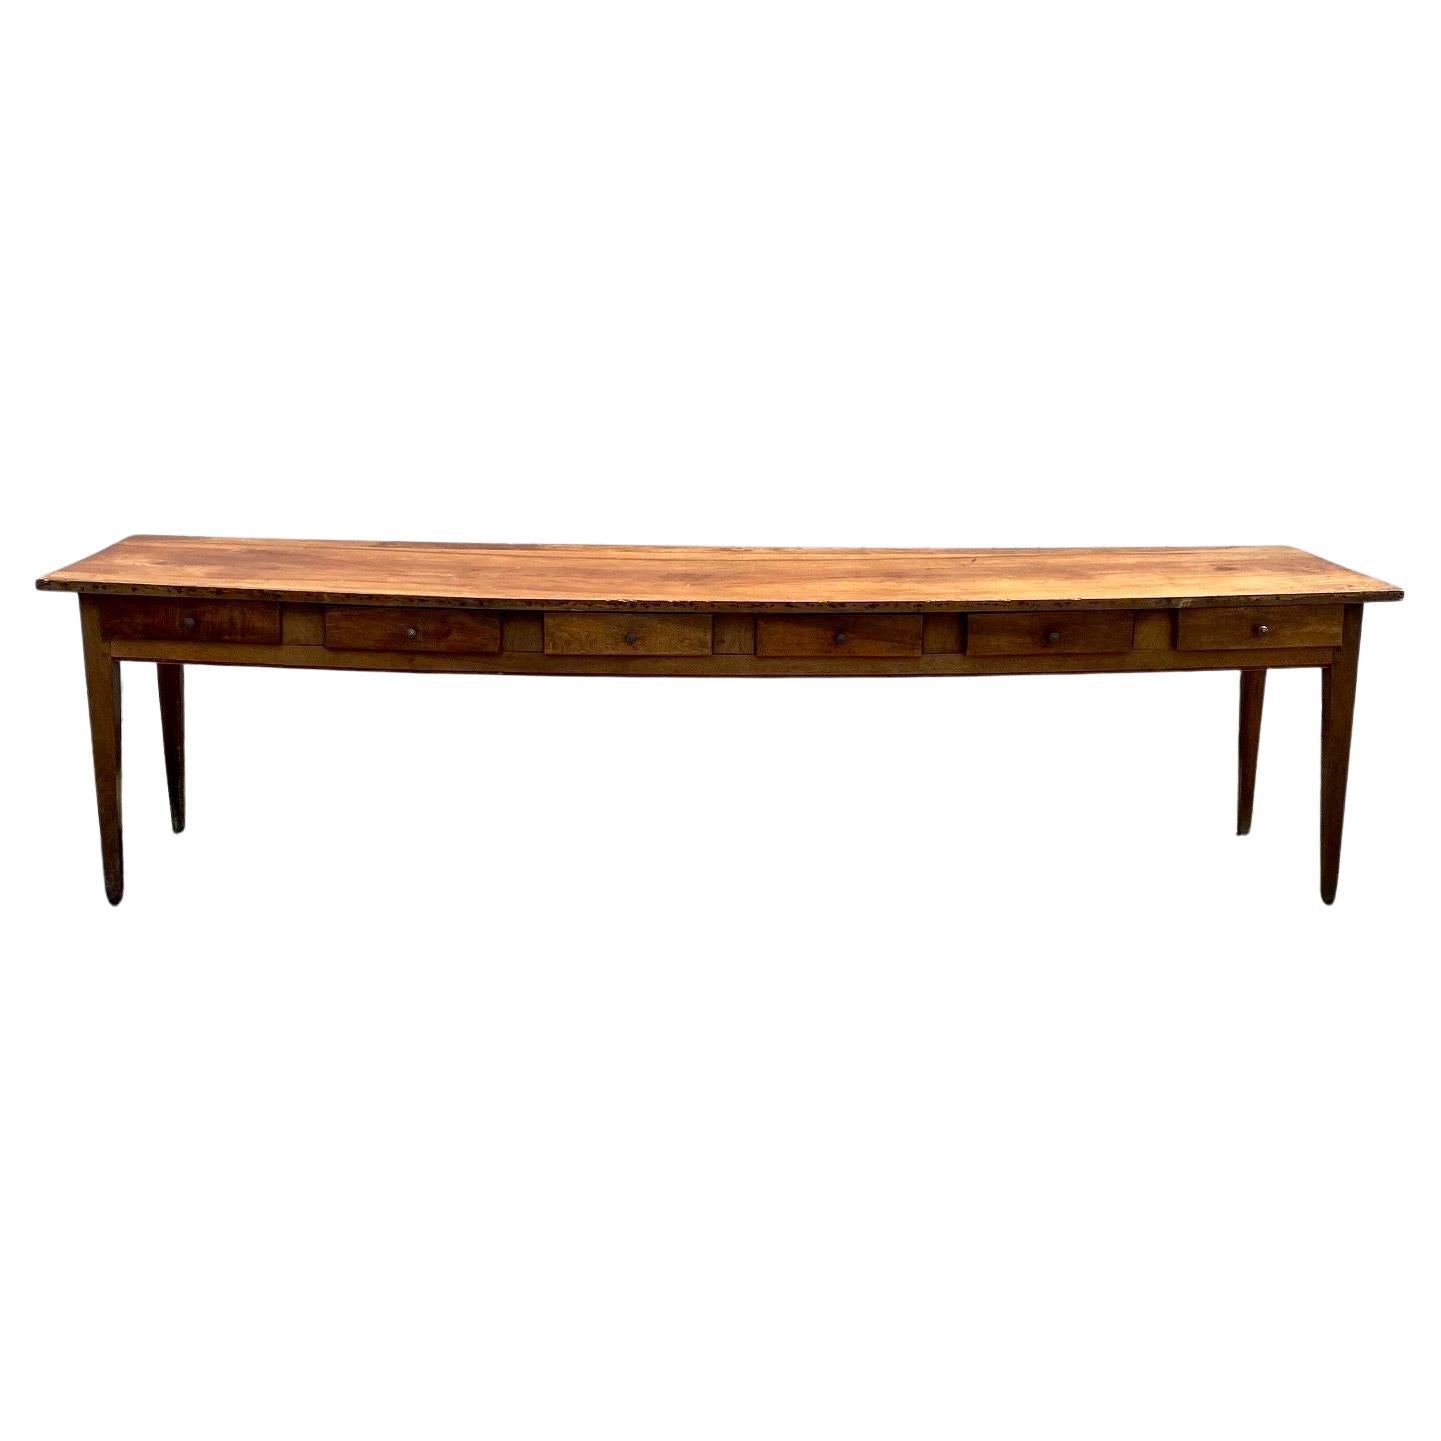 Very Long Character Rich 19th Century French Walnut Farm Table from Monastery